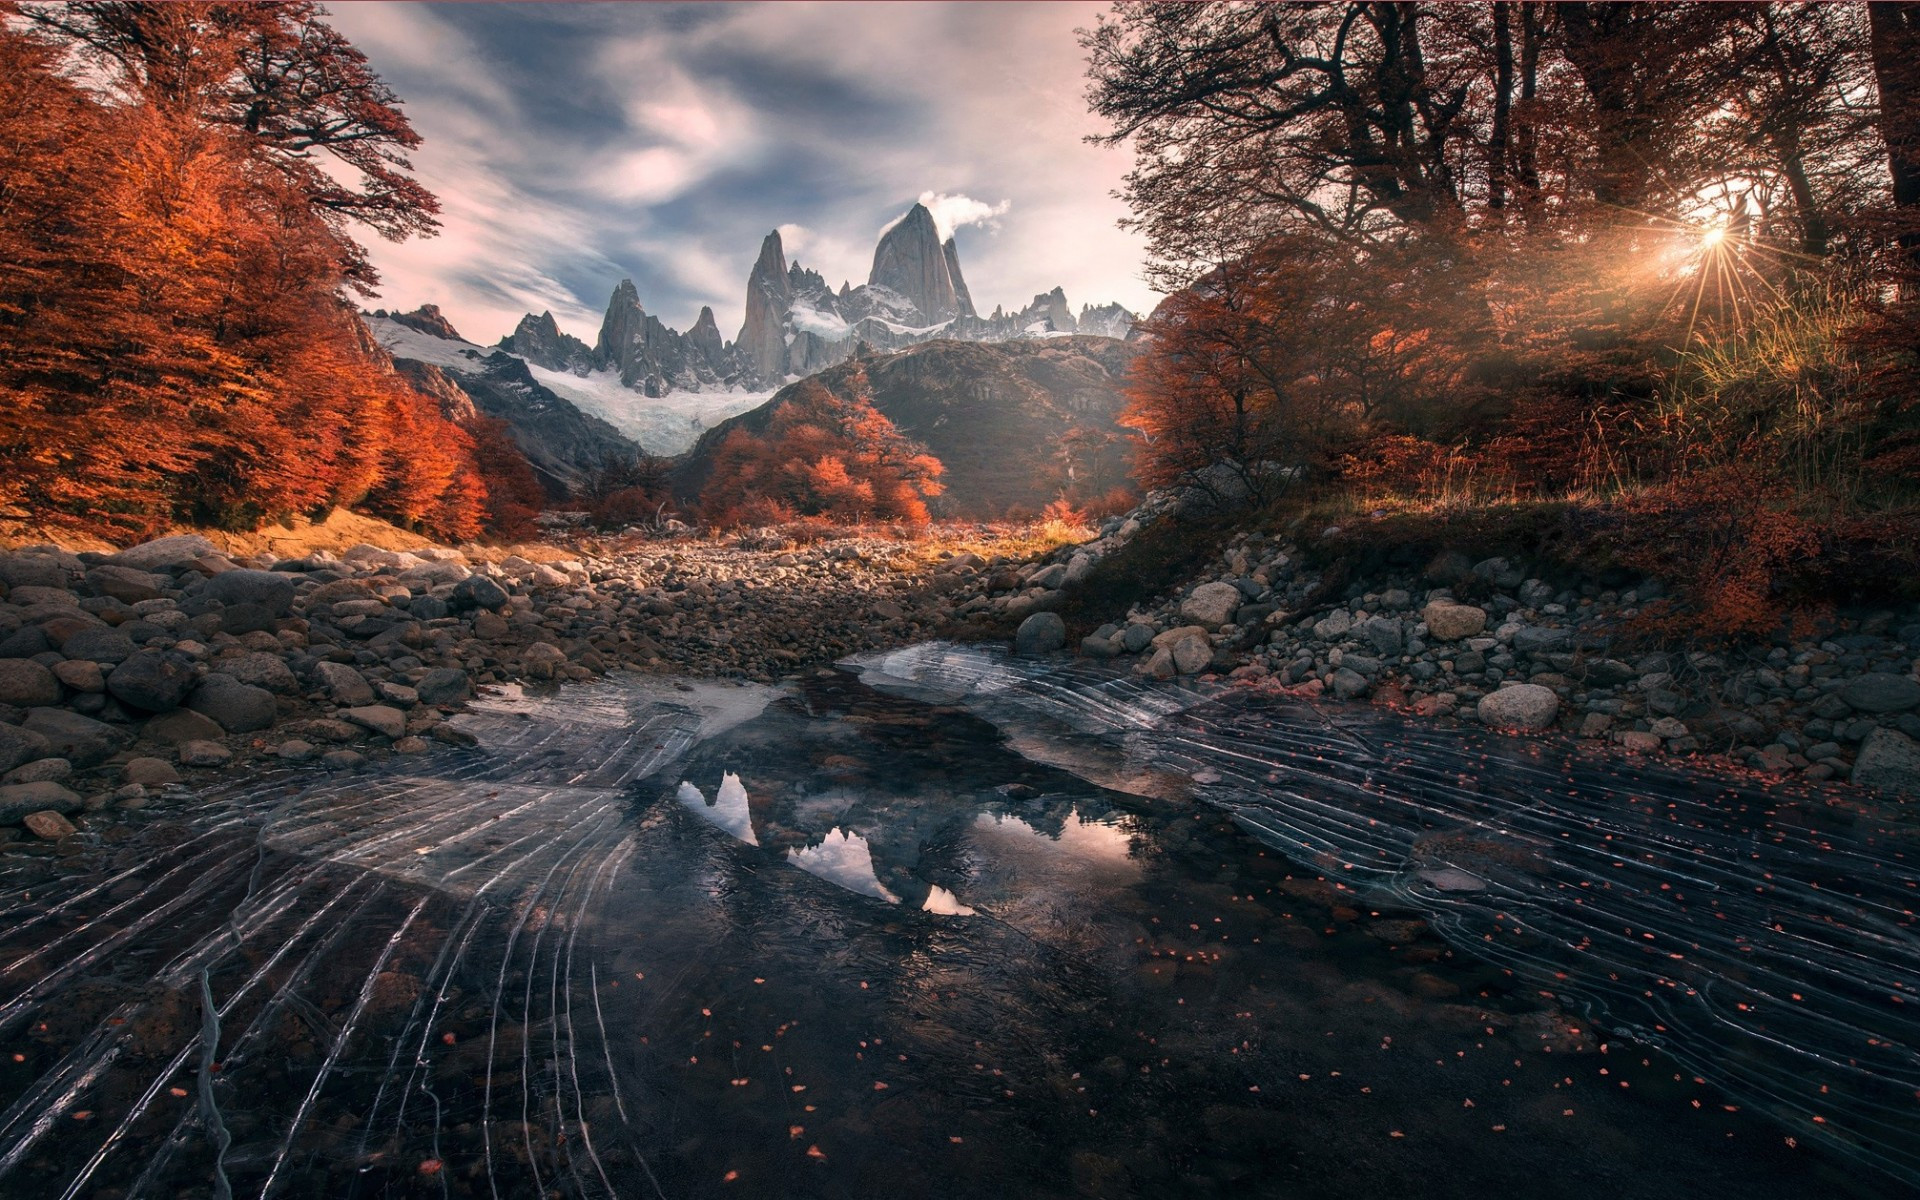 Download 1920x1200 Chile Patagonia, Autumn, Sun Rays, Trees, Stream Wallpaper for MacBook Pro 17 inch